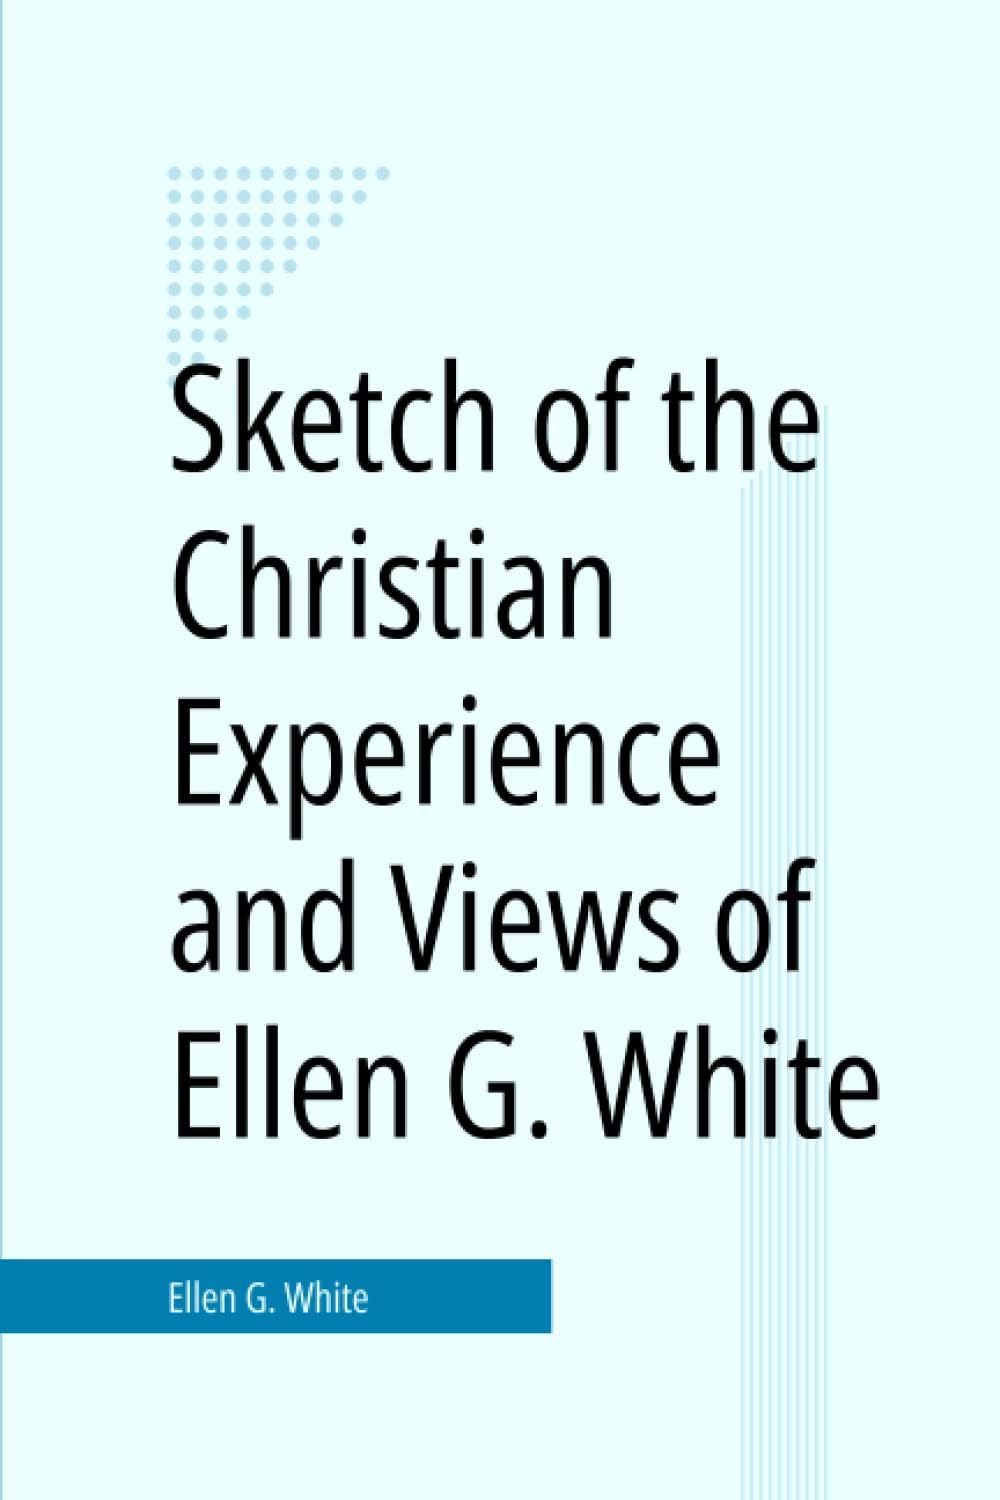 Sketch of the Christian Experience and Views of Ellen G. White